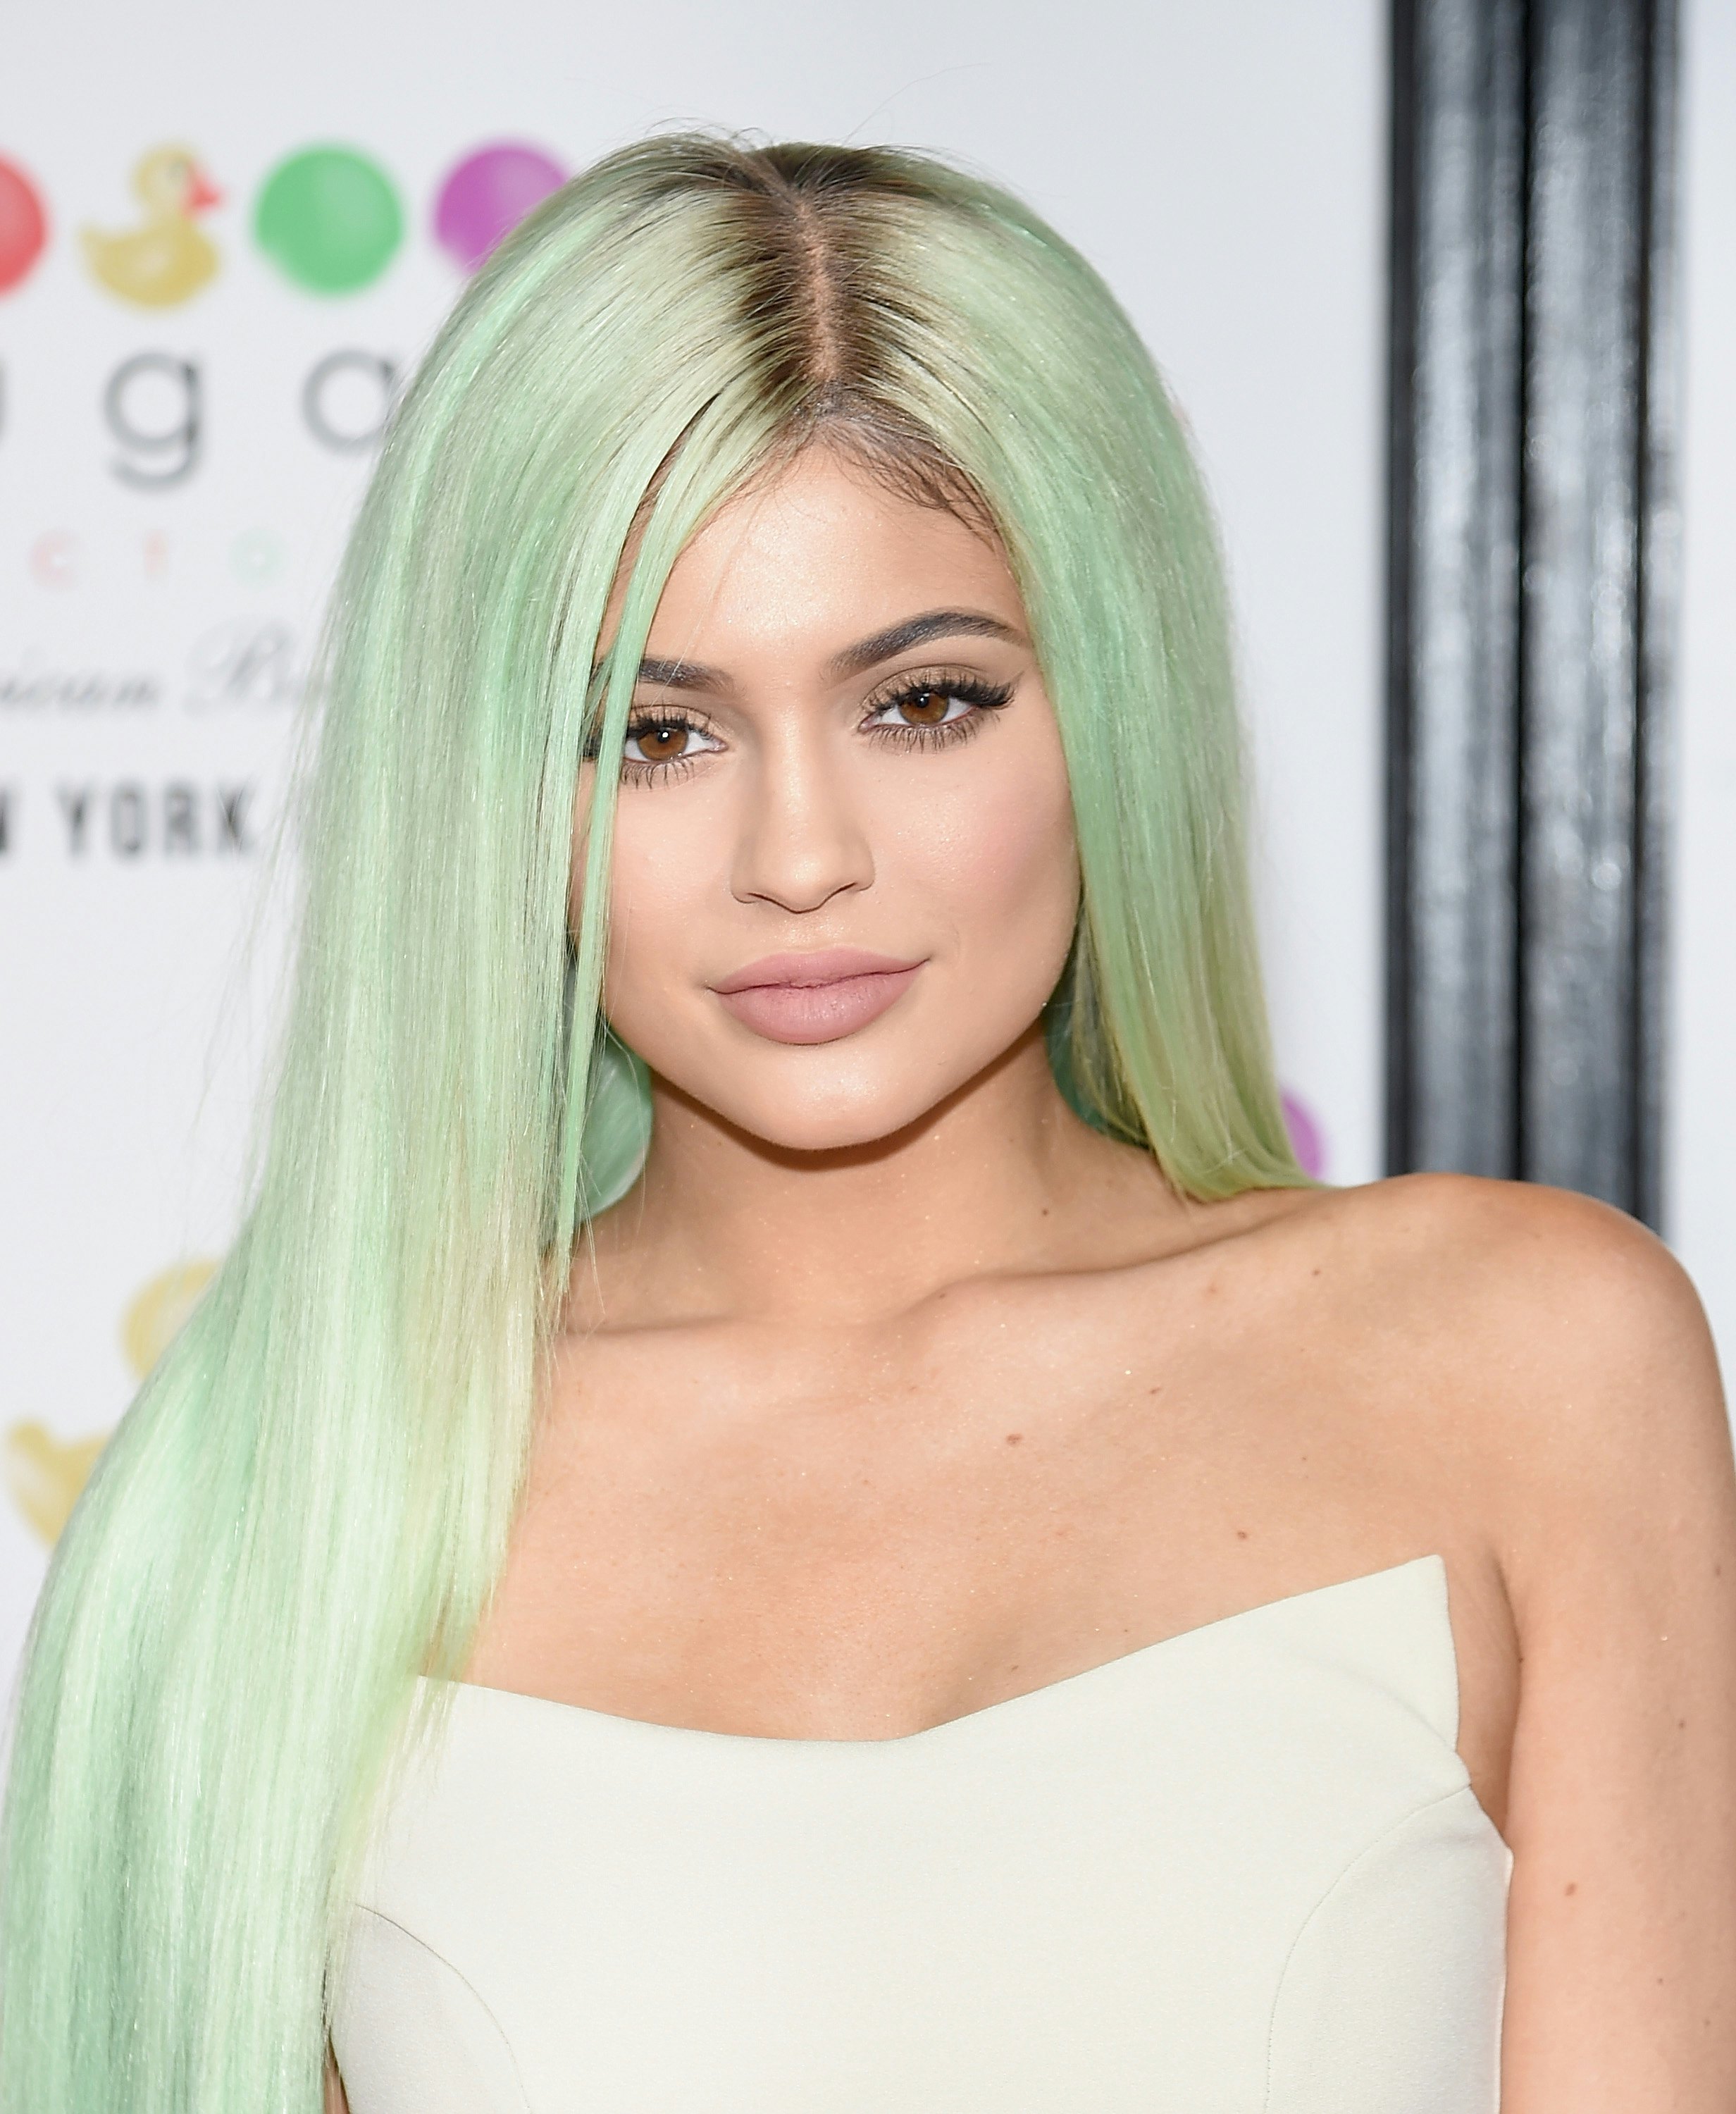 Kylie Jenner Wearing Wigs Anymore 